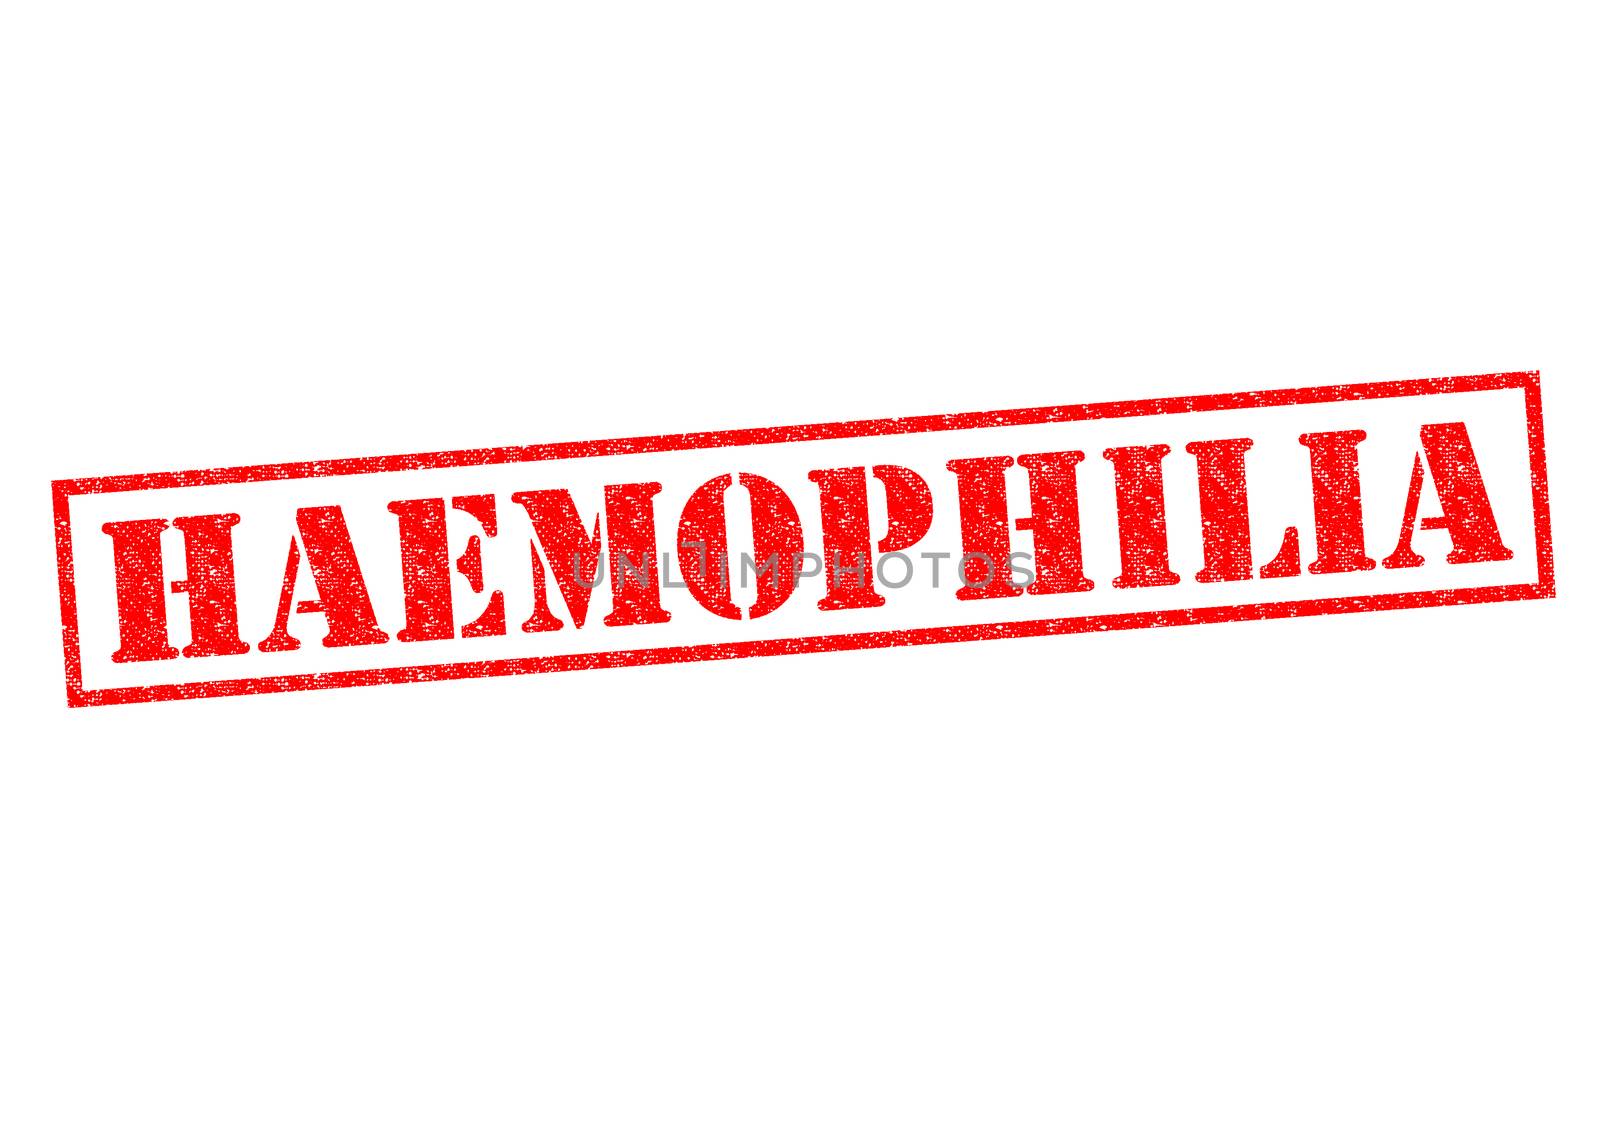 HAEMOPHILIA red Rubber Stamp over a white background.